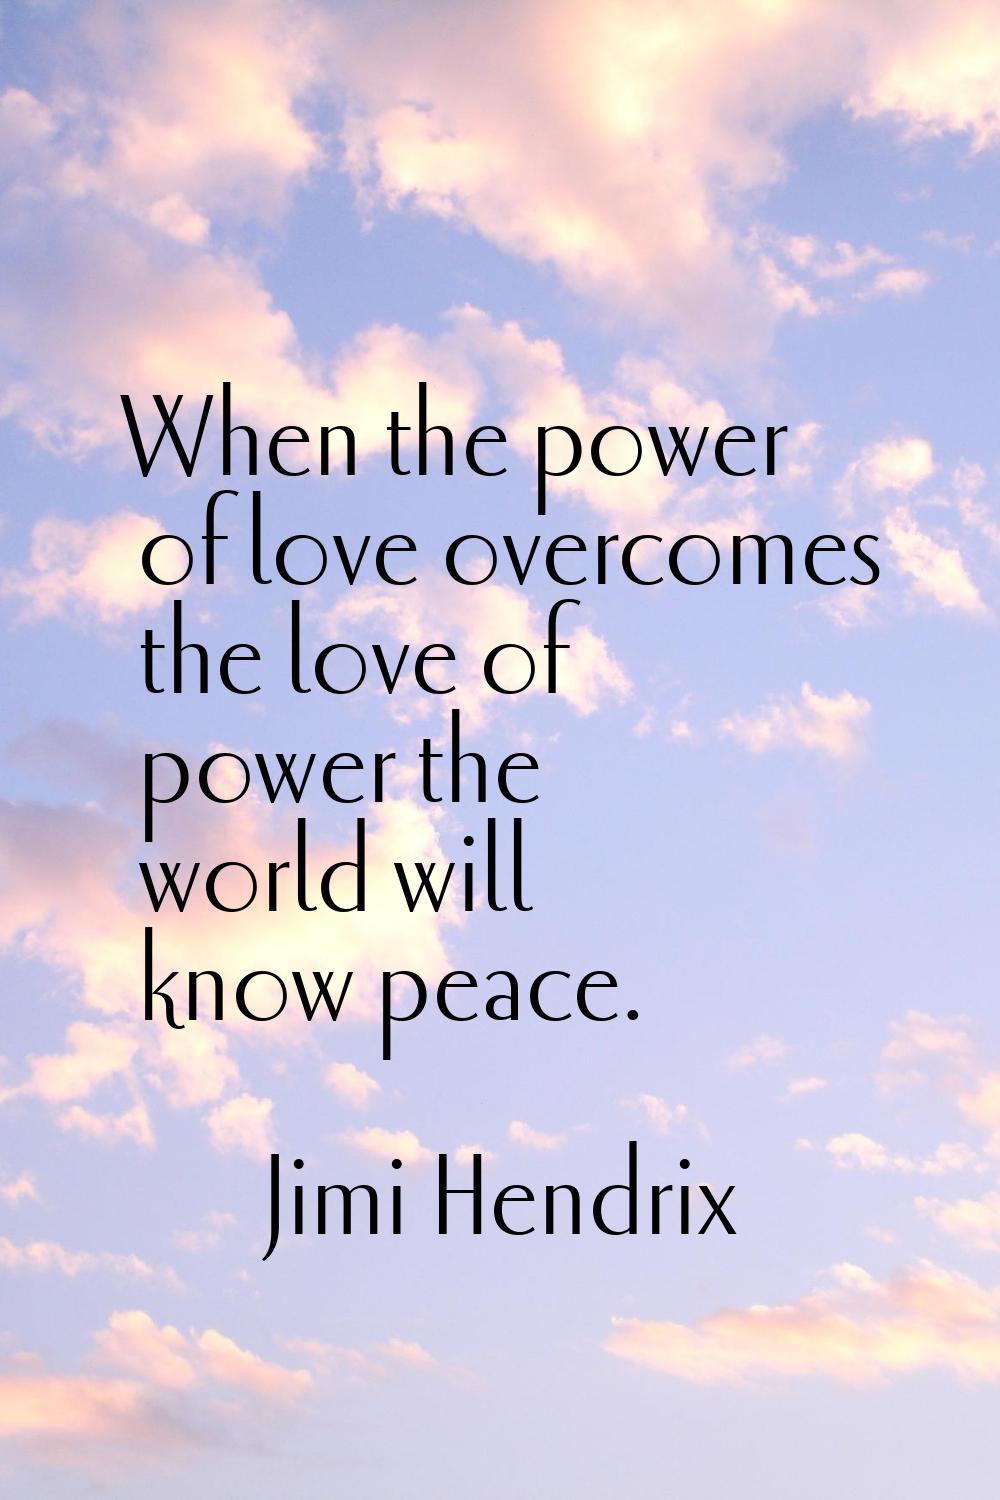 When the power of love overcomes the love of power the world will know peace.